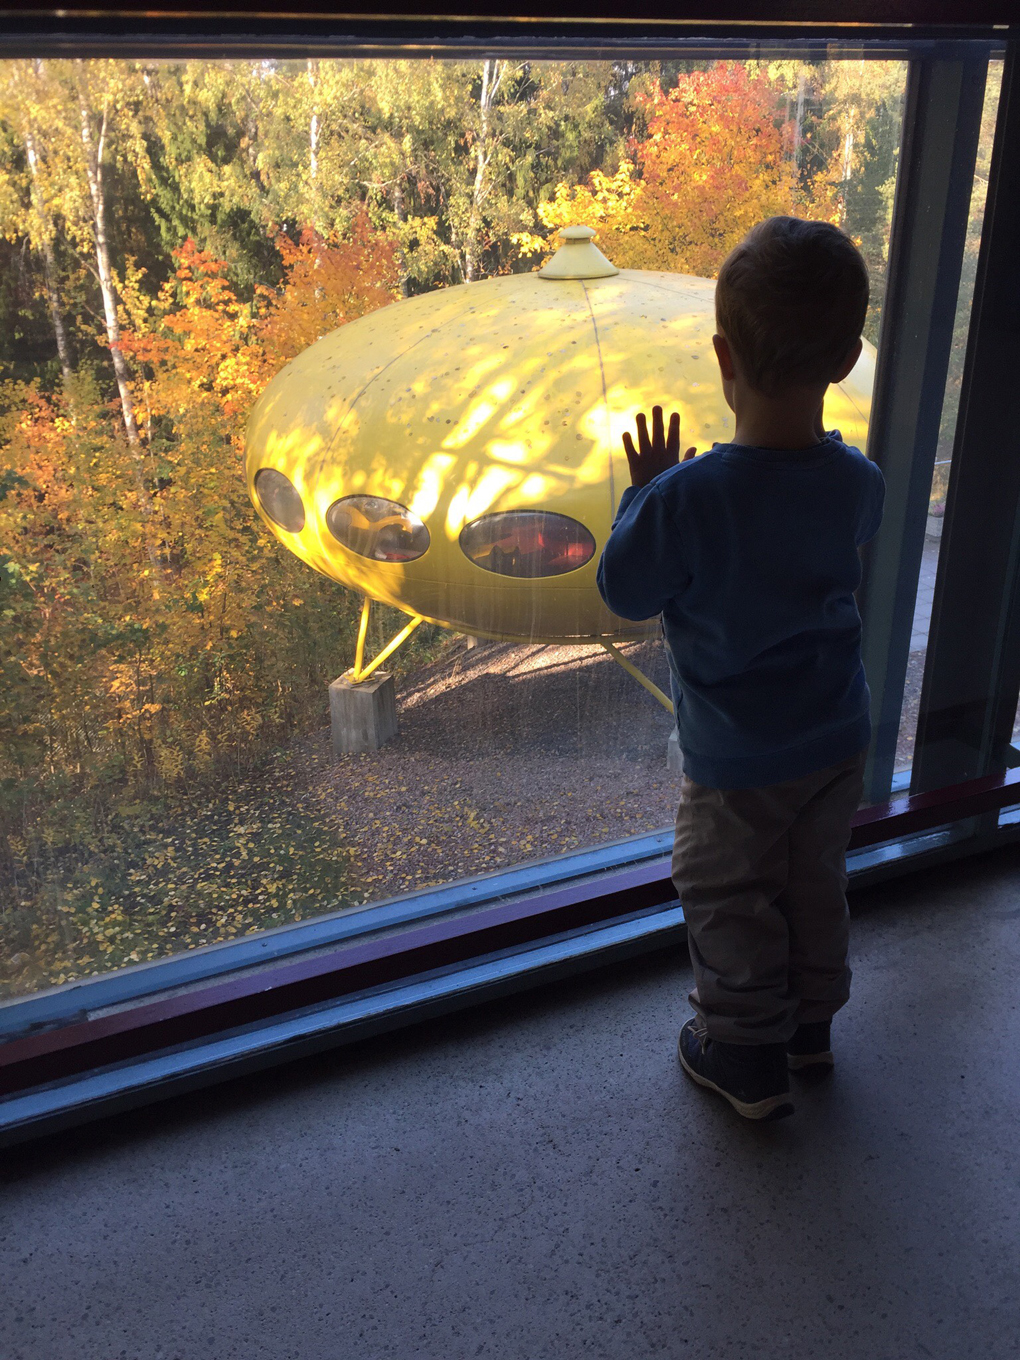 Boy looking at a yellow object